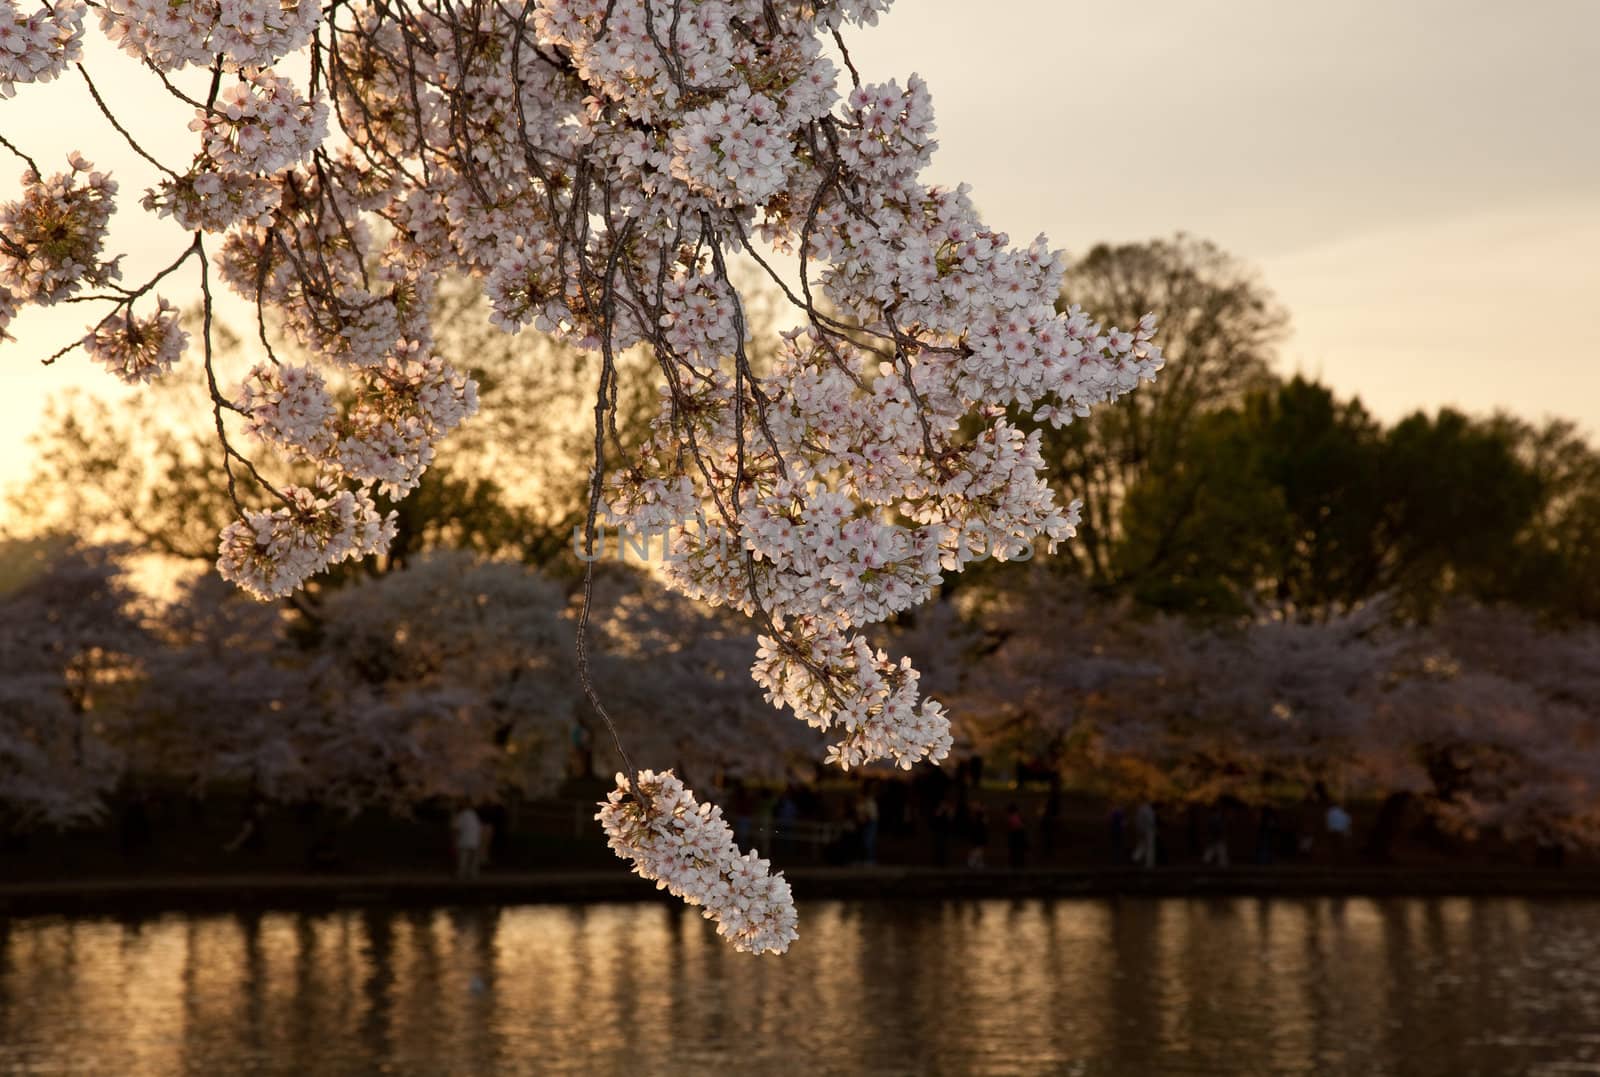 Warm colors of cherry blossom flowers against the setting sun in Washington DC